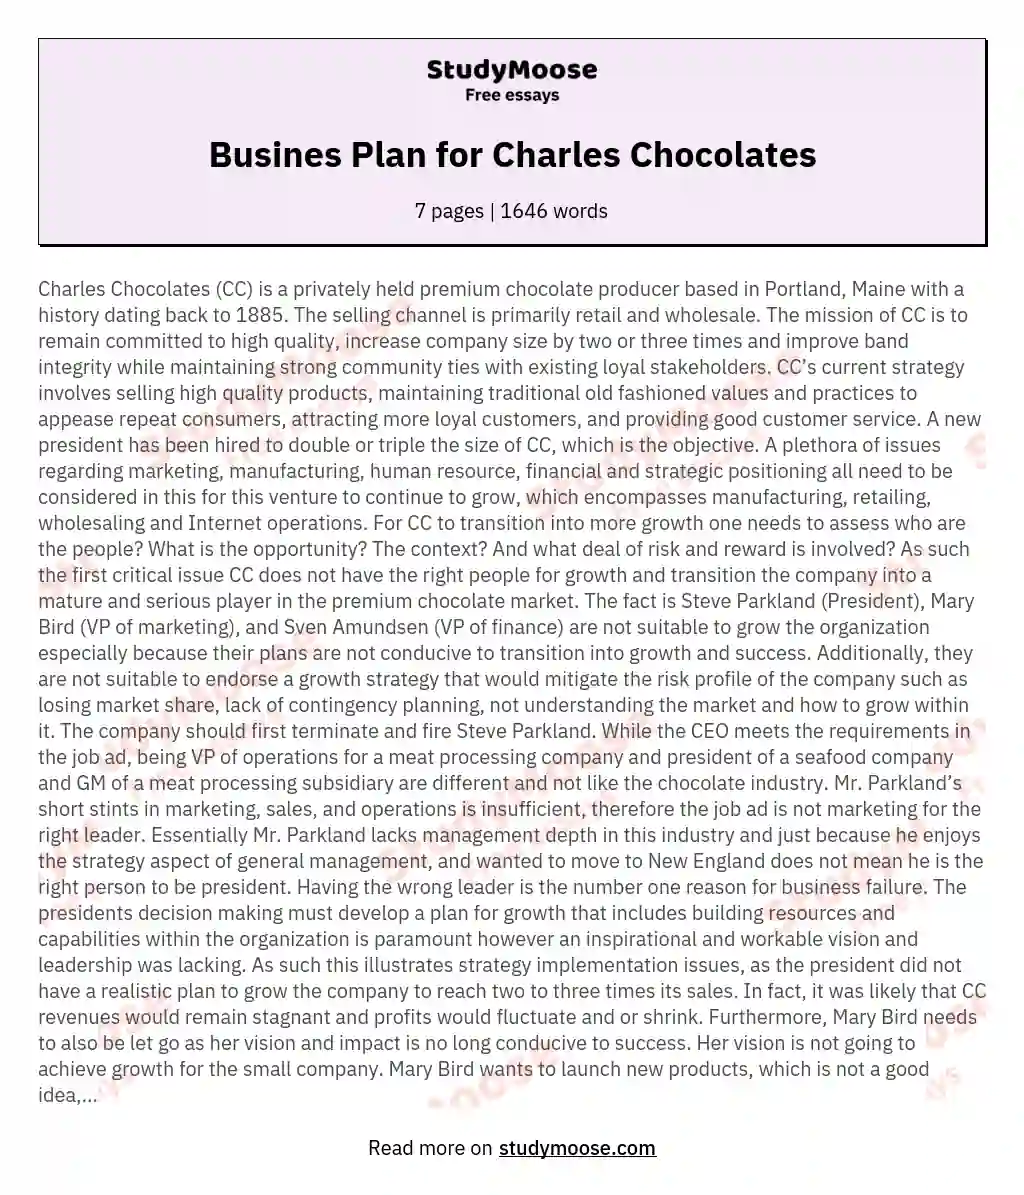 Busines Plan for Charles Chocolates